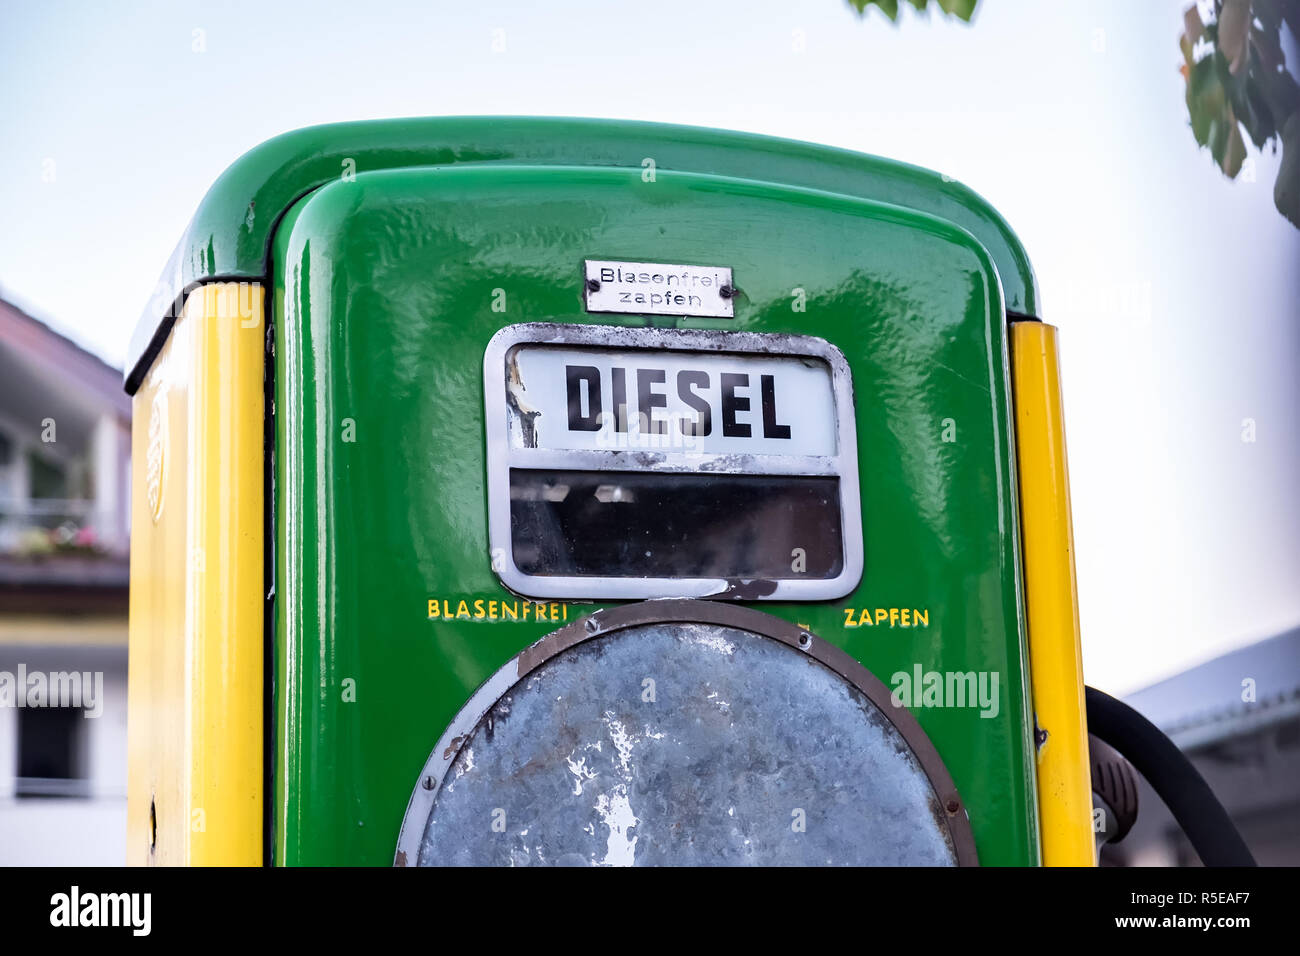 Historic green and yellow fuel dispenser for diesel petrol with German text 'Blasenfrei zapfen' (engl. Refuel without bubbles) Stock Photo